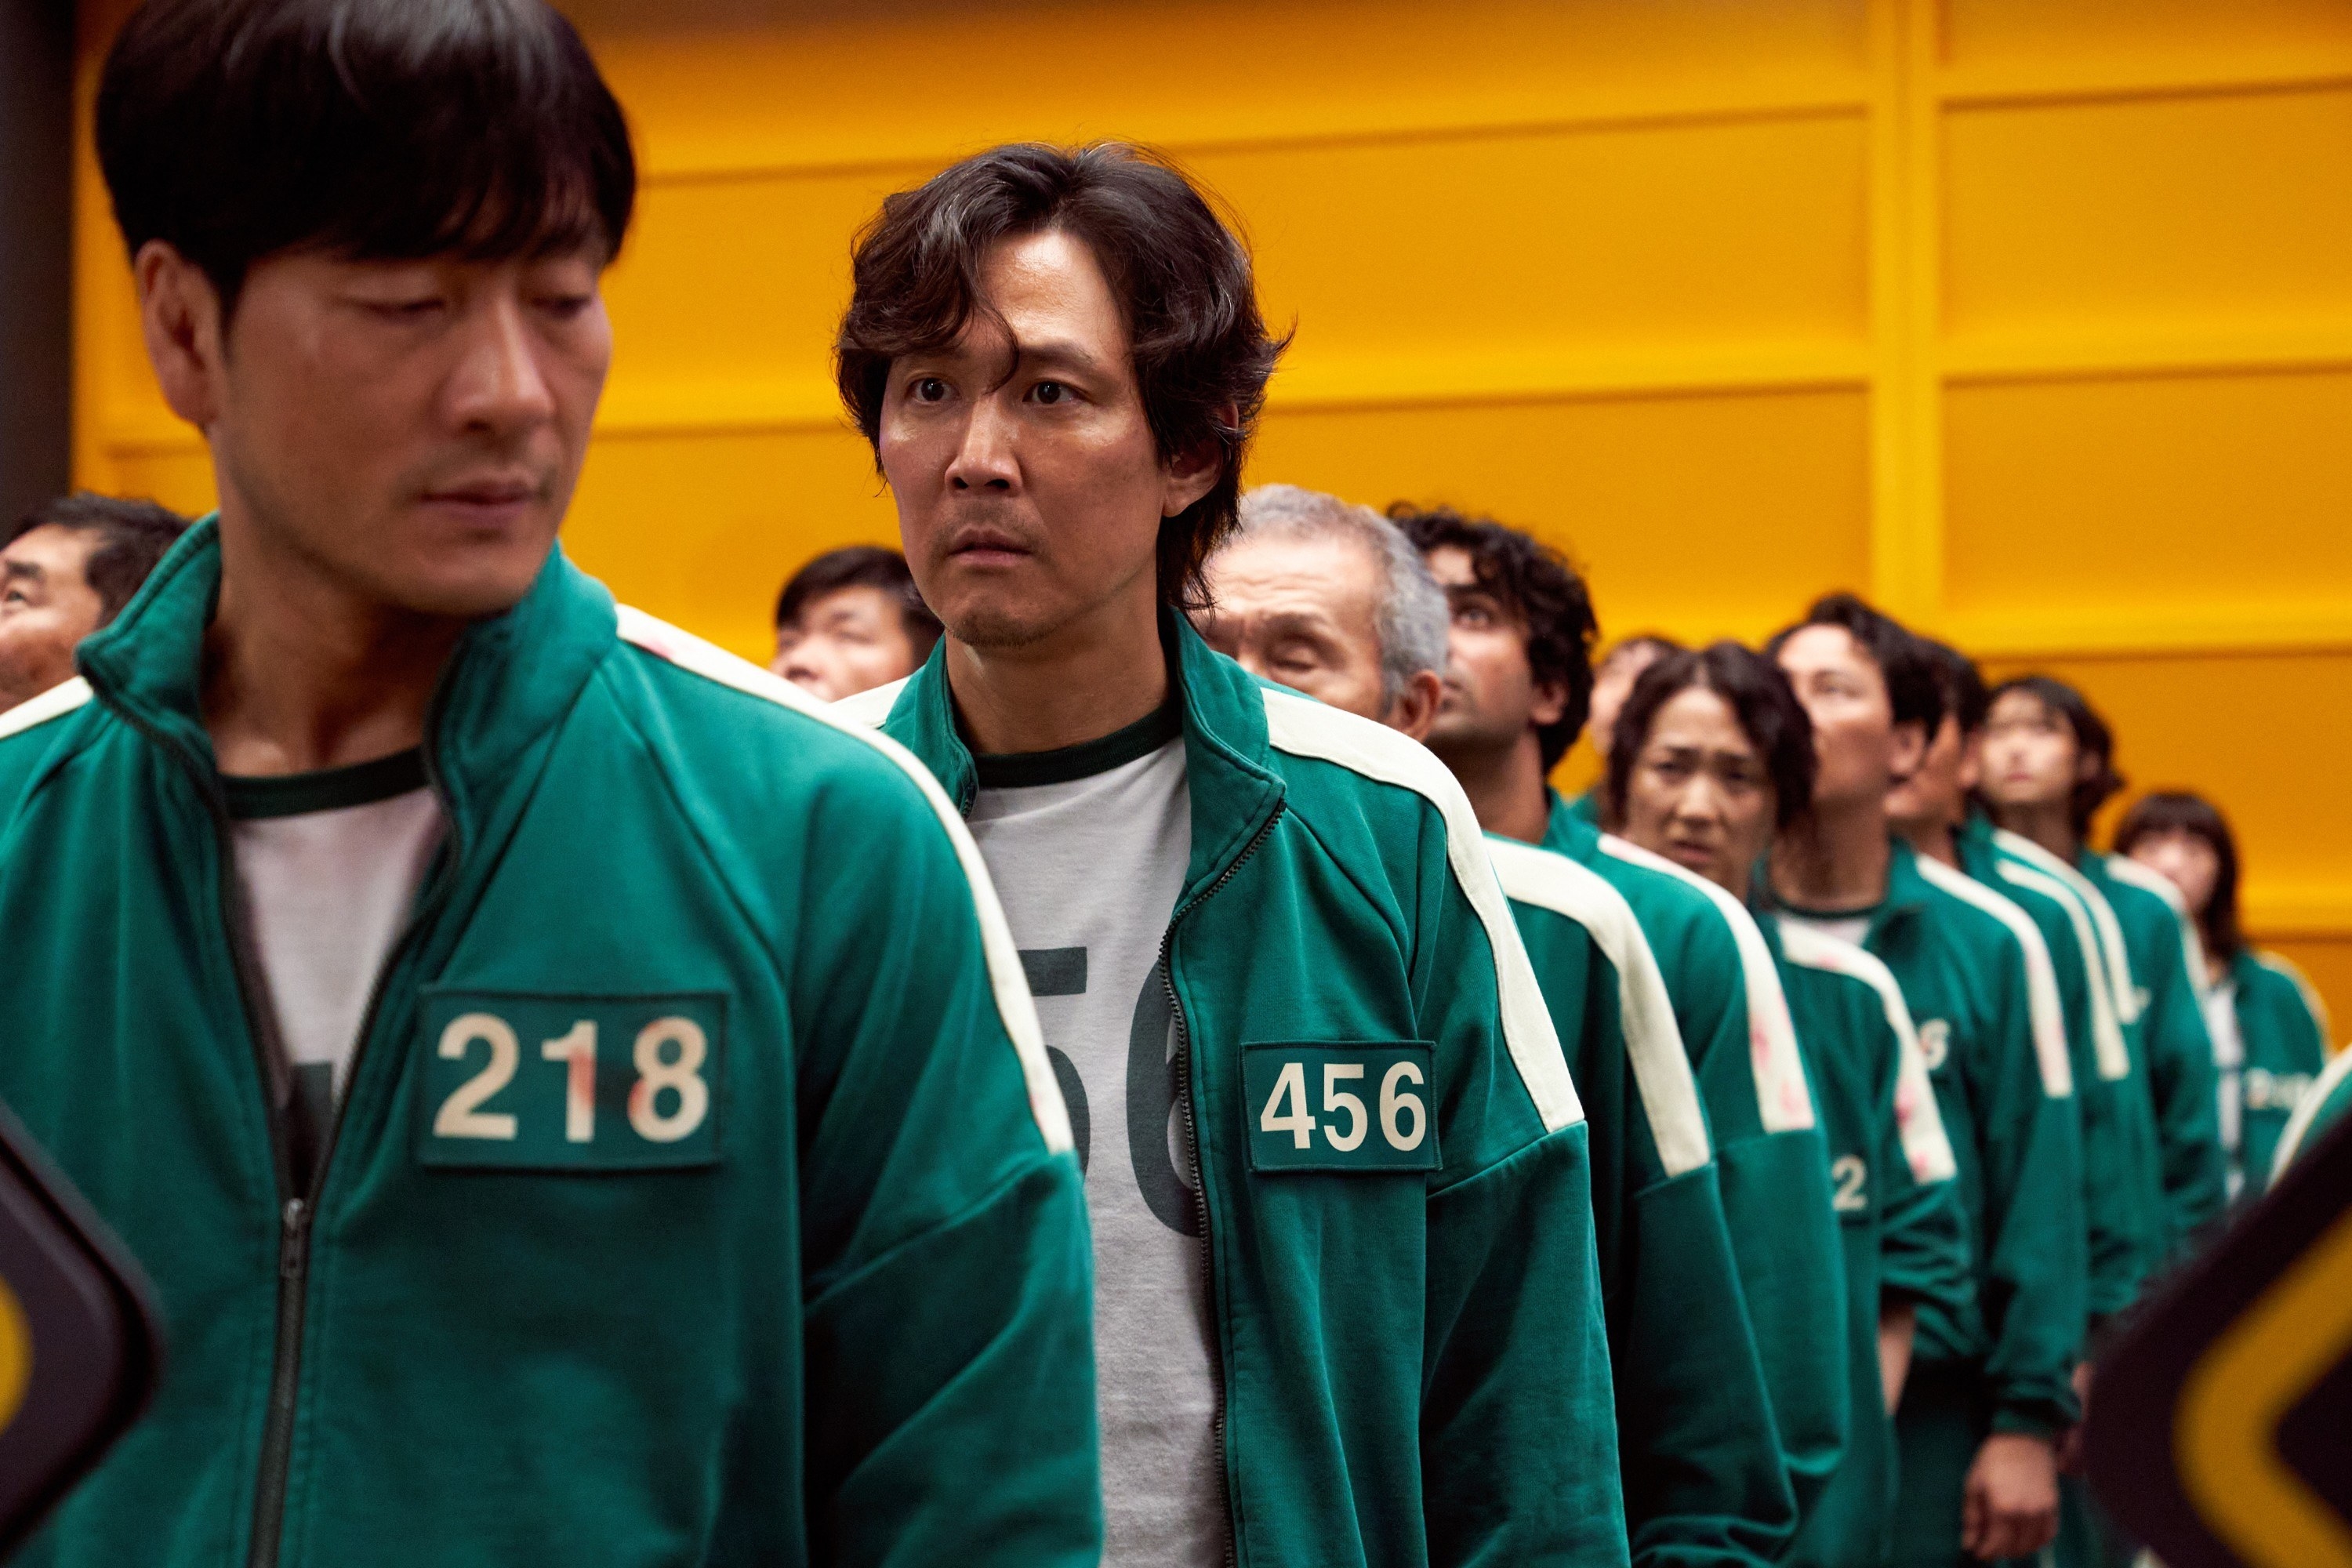 SQUID GAME, from left: PARK Hae-soo , LEE Jung-jae, ‘Stick to the Team&#x27;, (Season 1, ep. 104, aired in the US on Sept. 17, 2021).